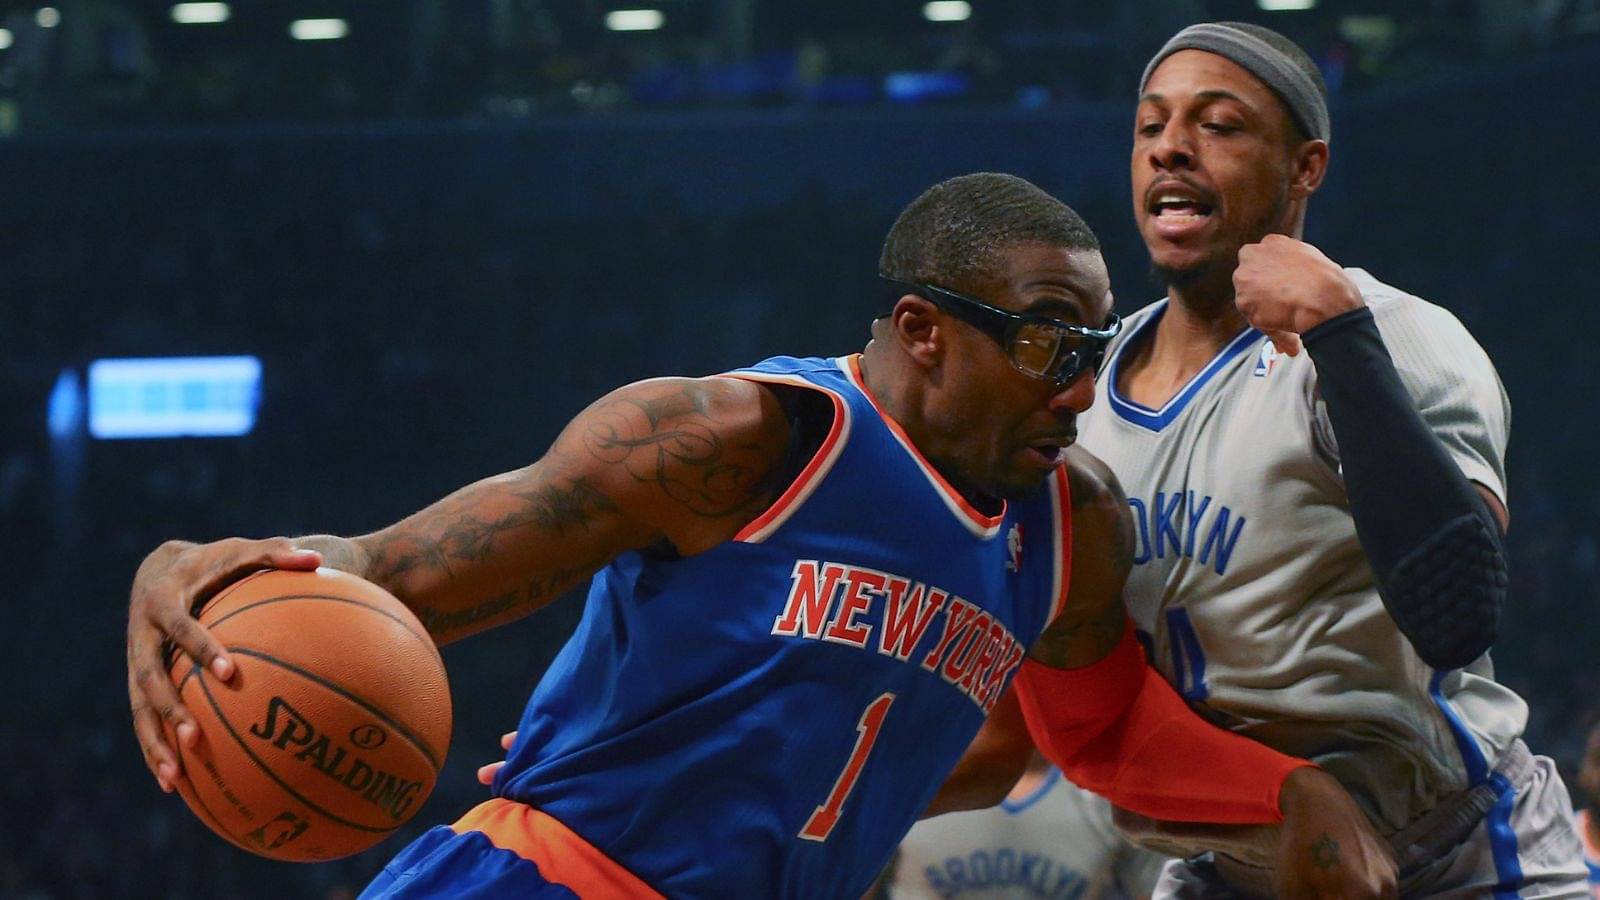 "I Only Argue With Kobe Bryant and LeBron James!": When Paul Pierce Belittled Amar'e Stoudemire in a Match Against the Knicks